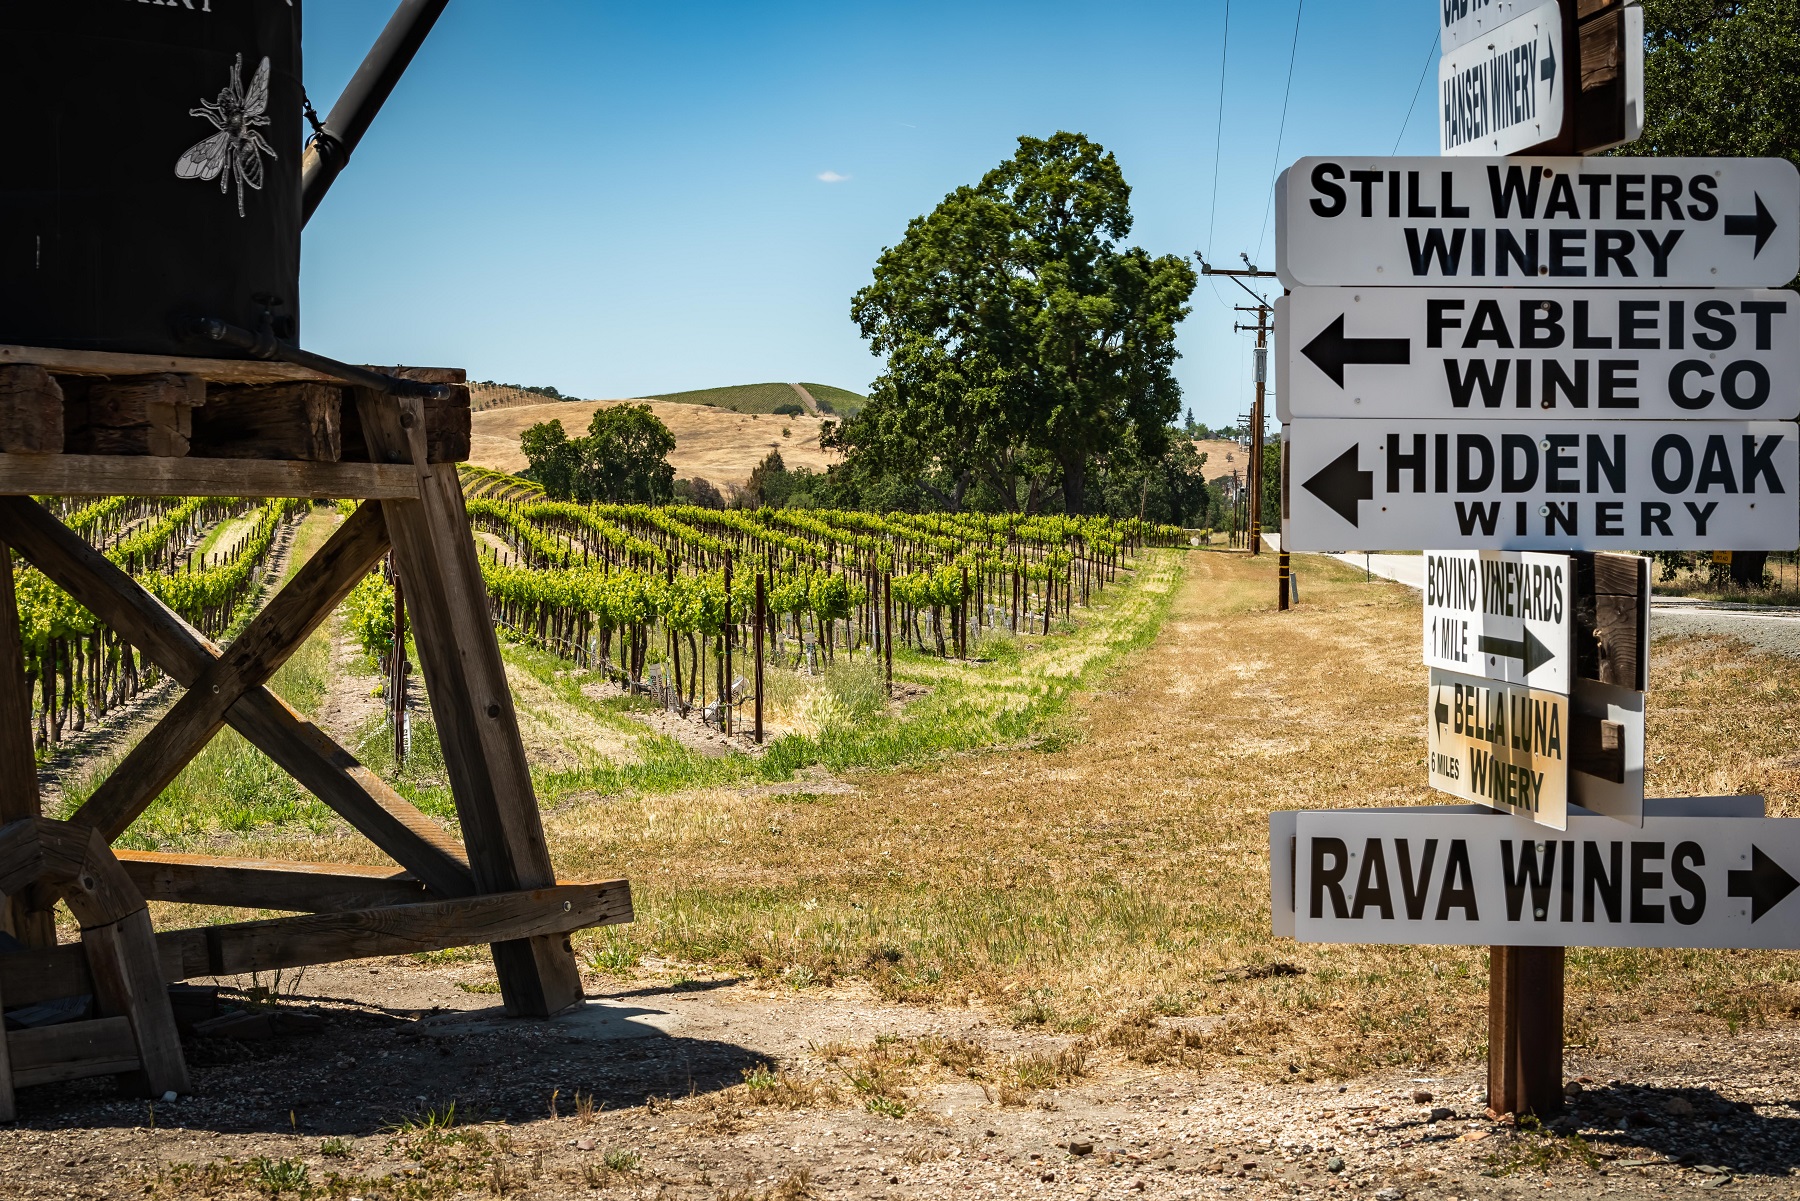 Surrounded by acres of vineyards and great wineries.